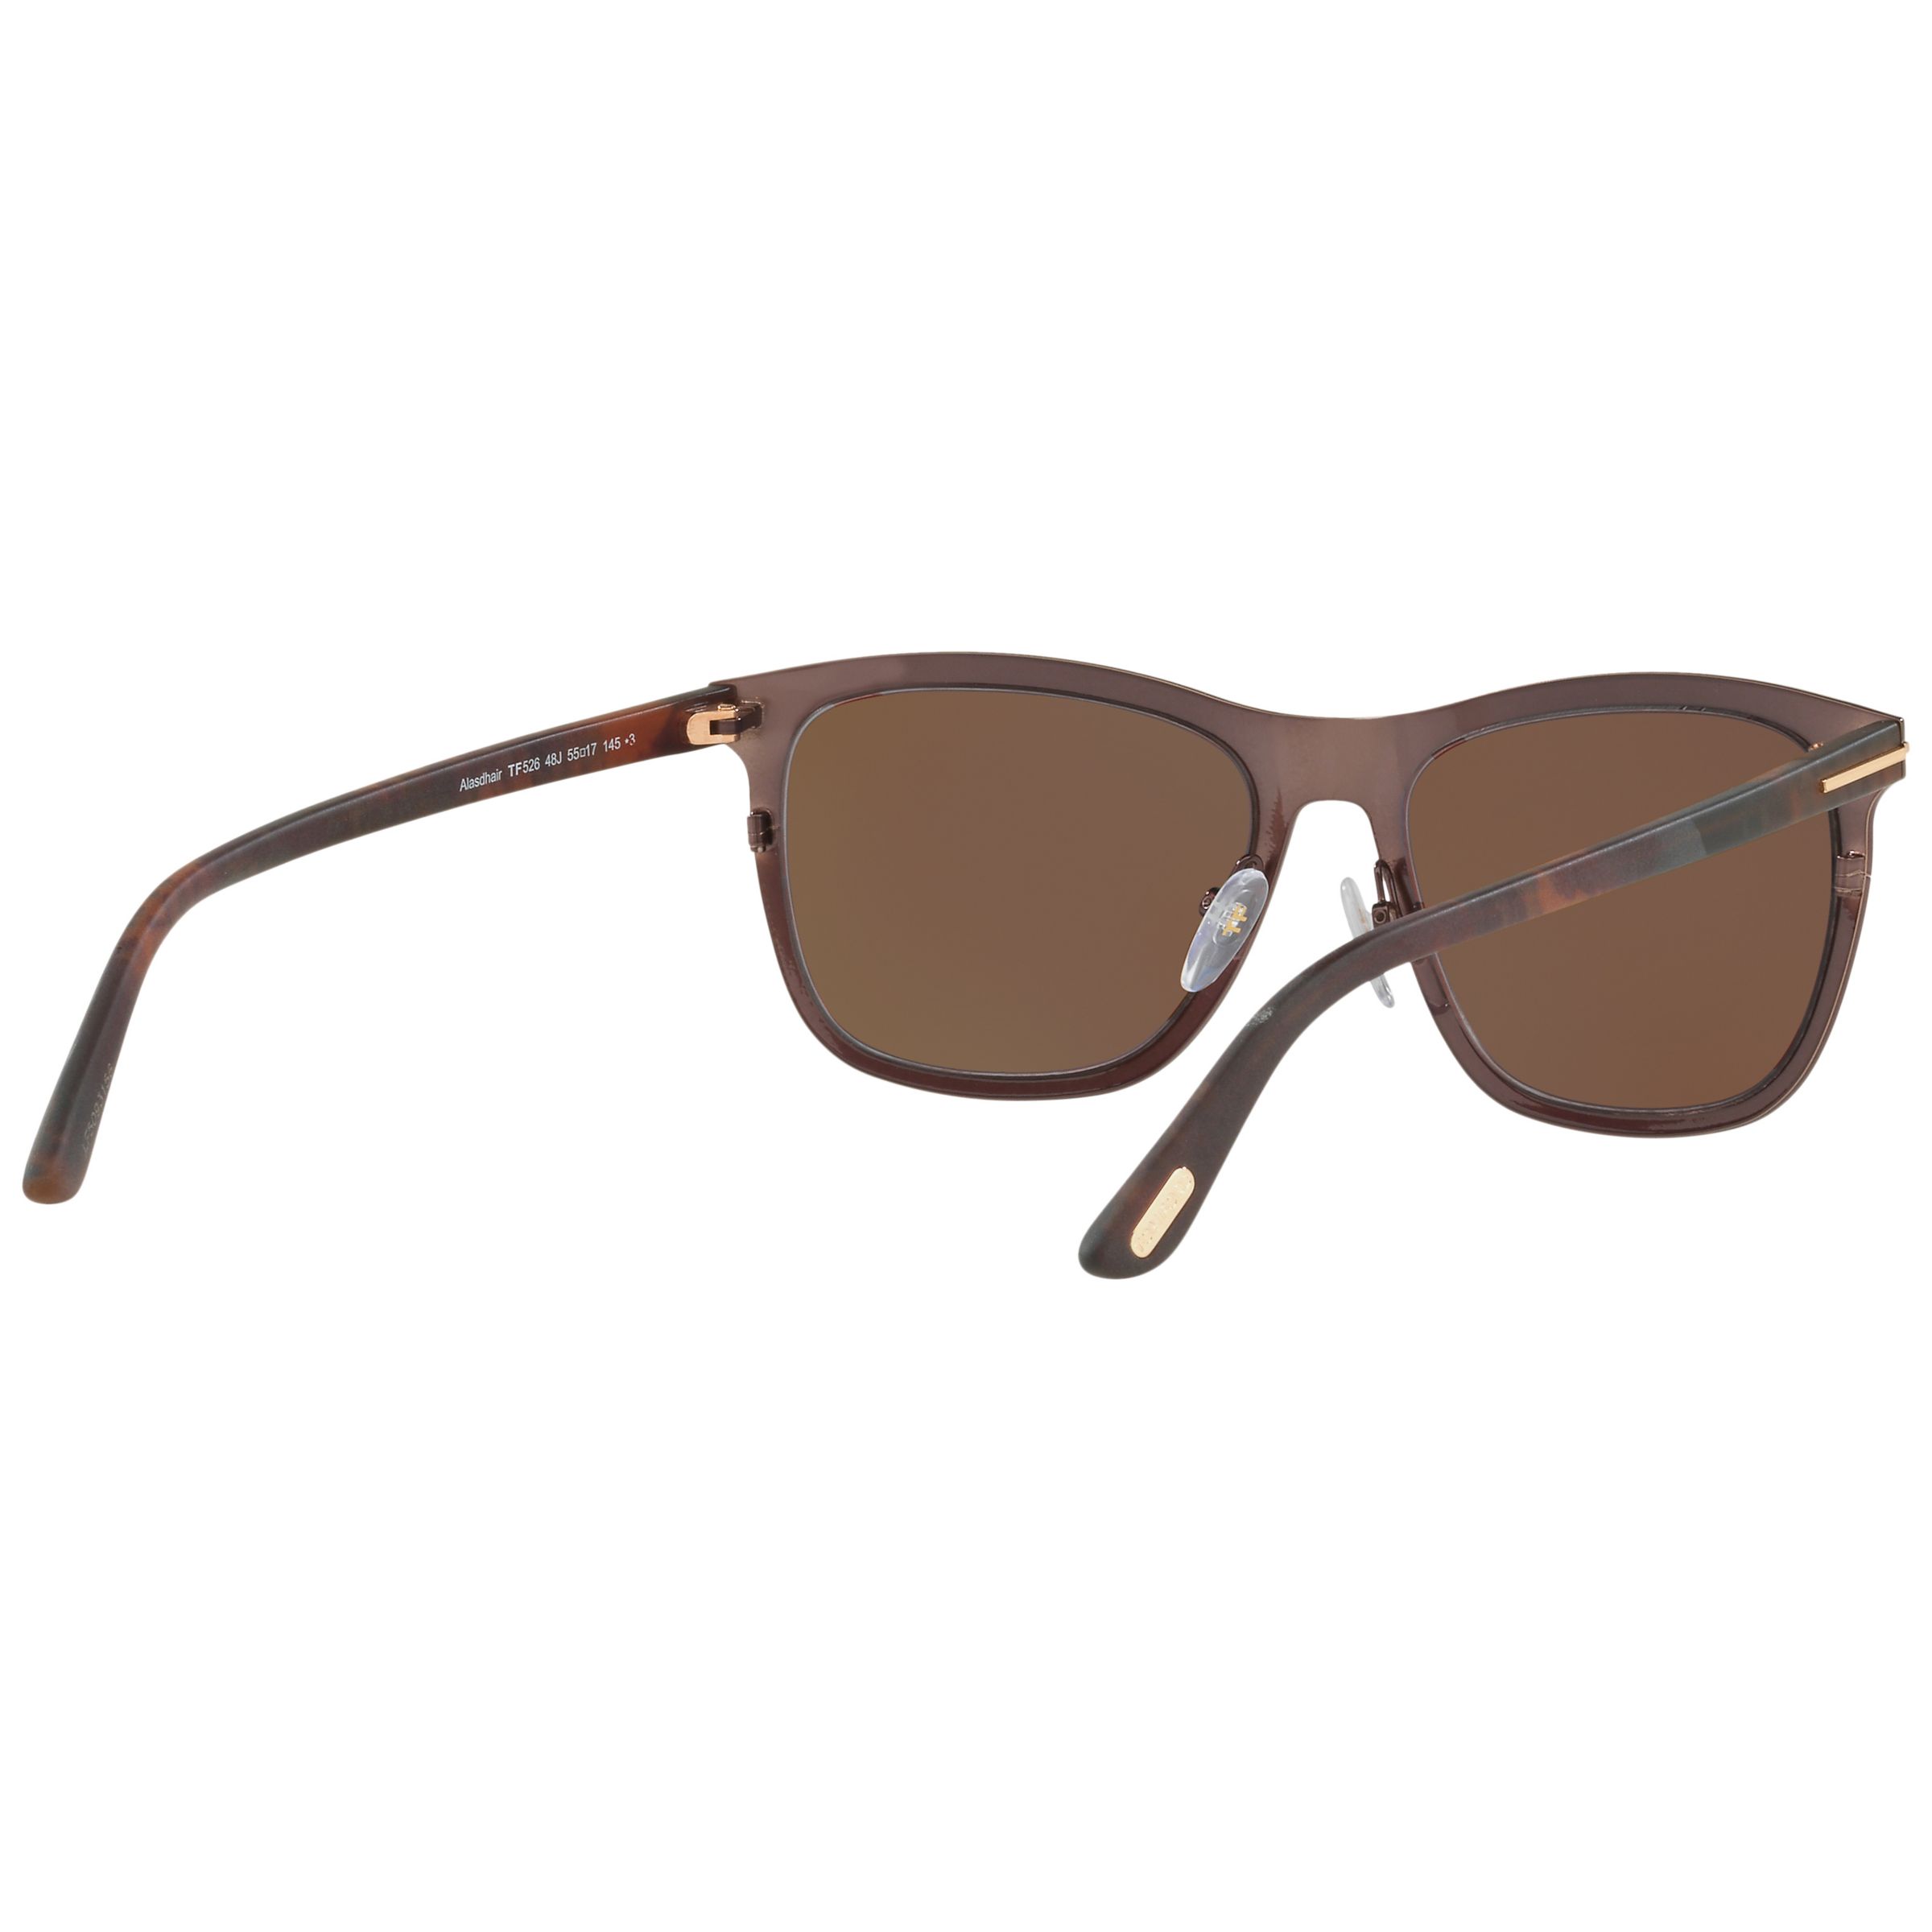 TOM FORD FT0526 Alasdhair Square Sunglasses, Brown at John Lewis & Partners